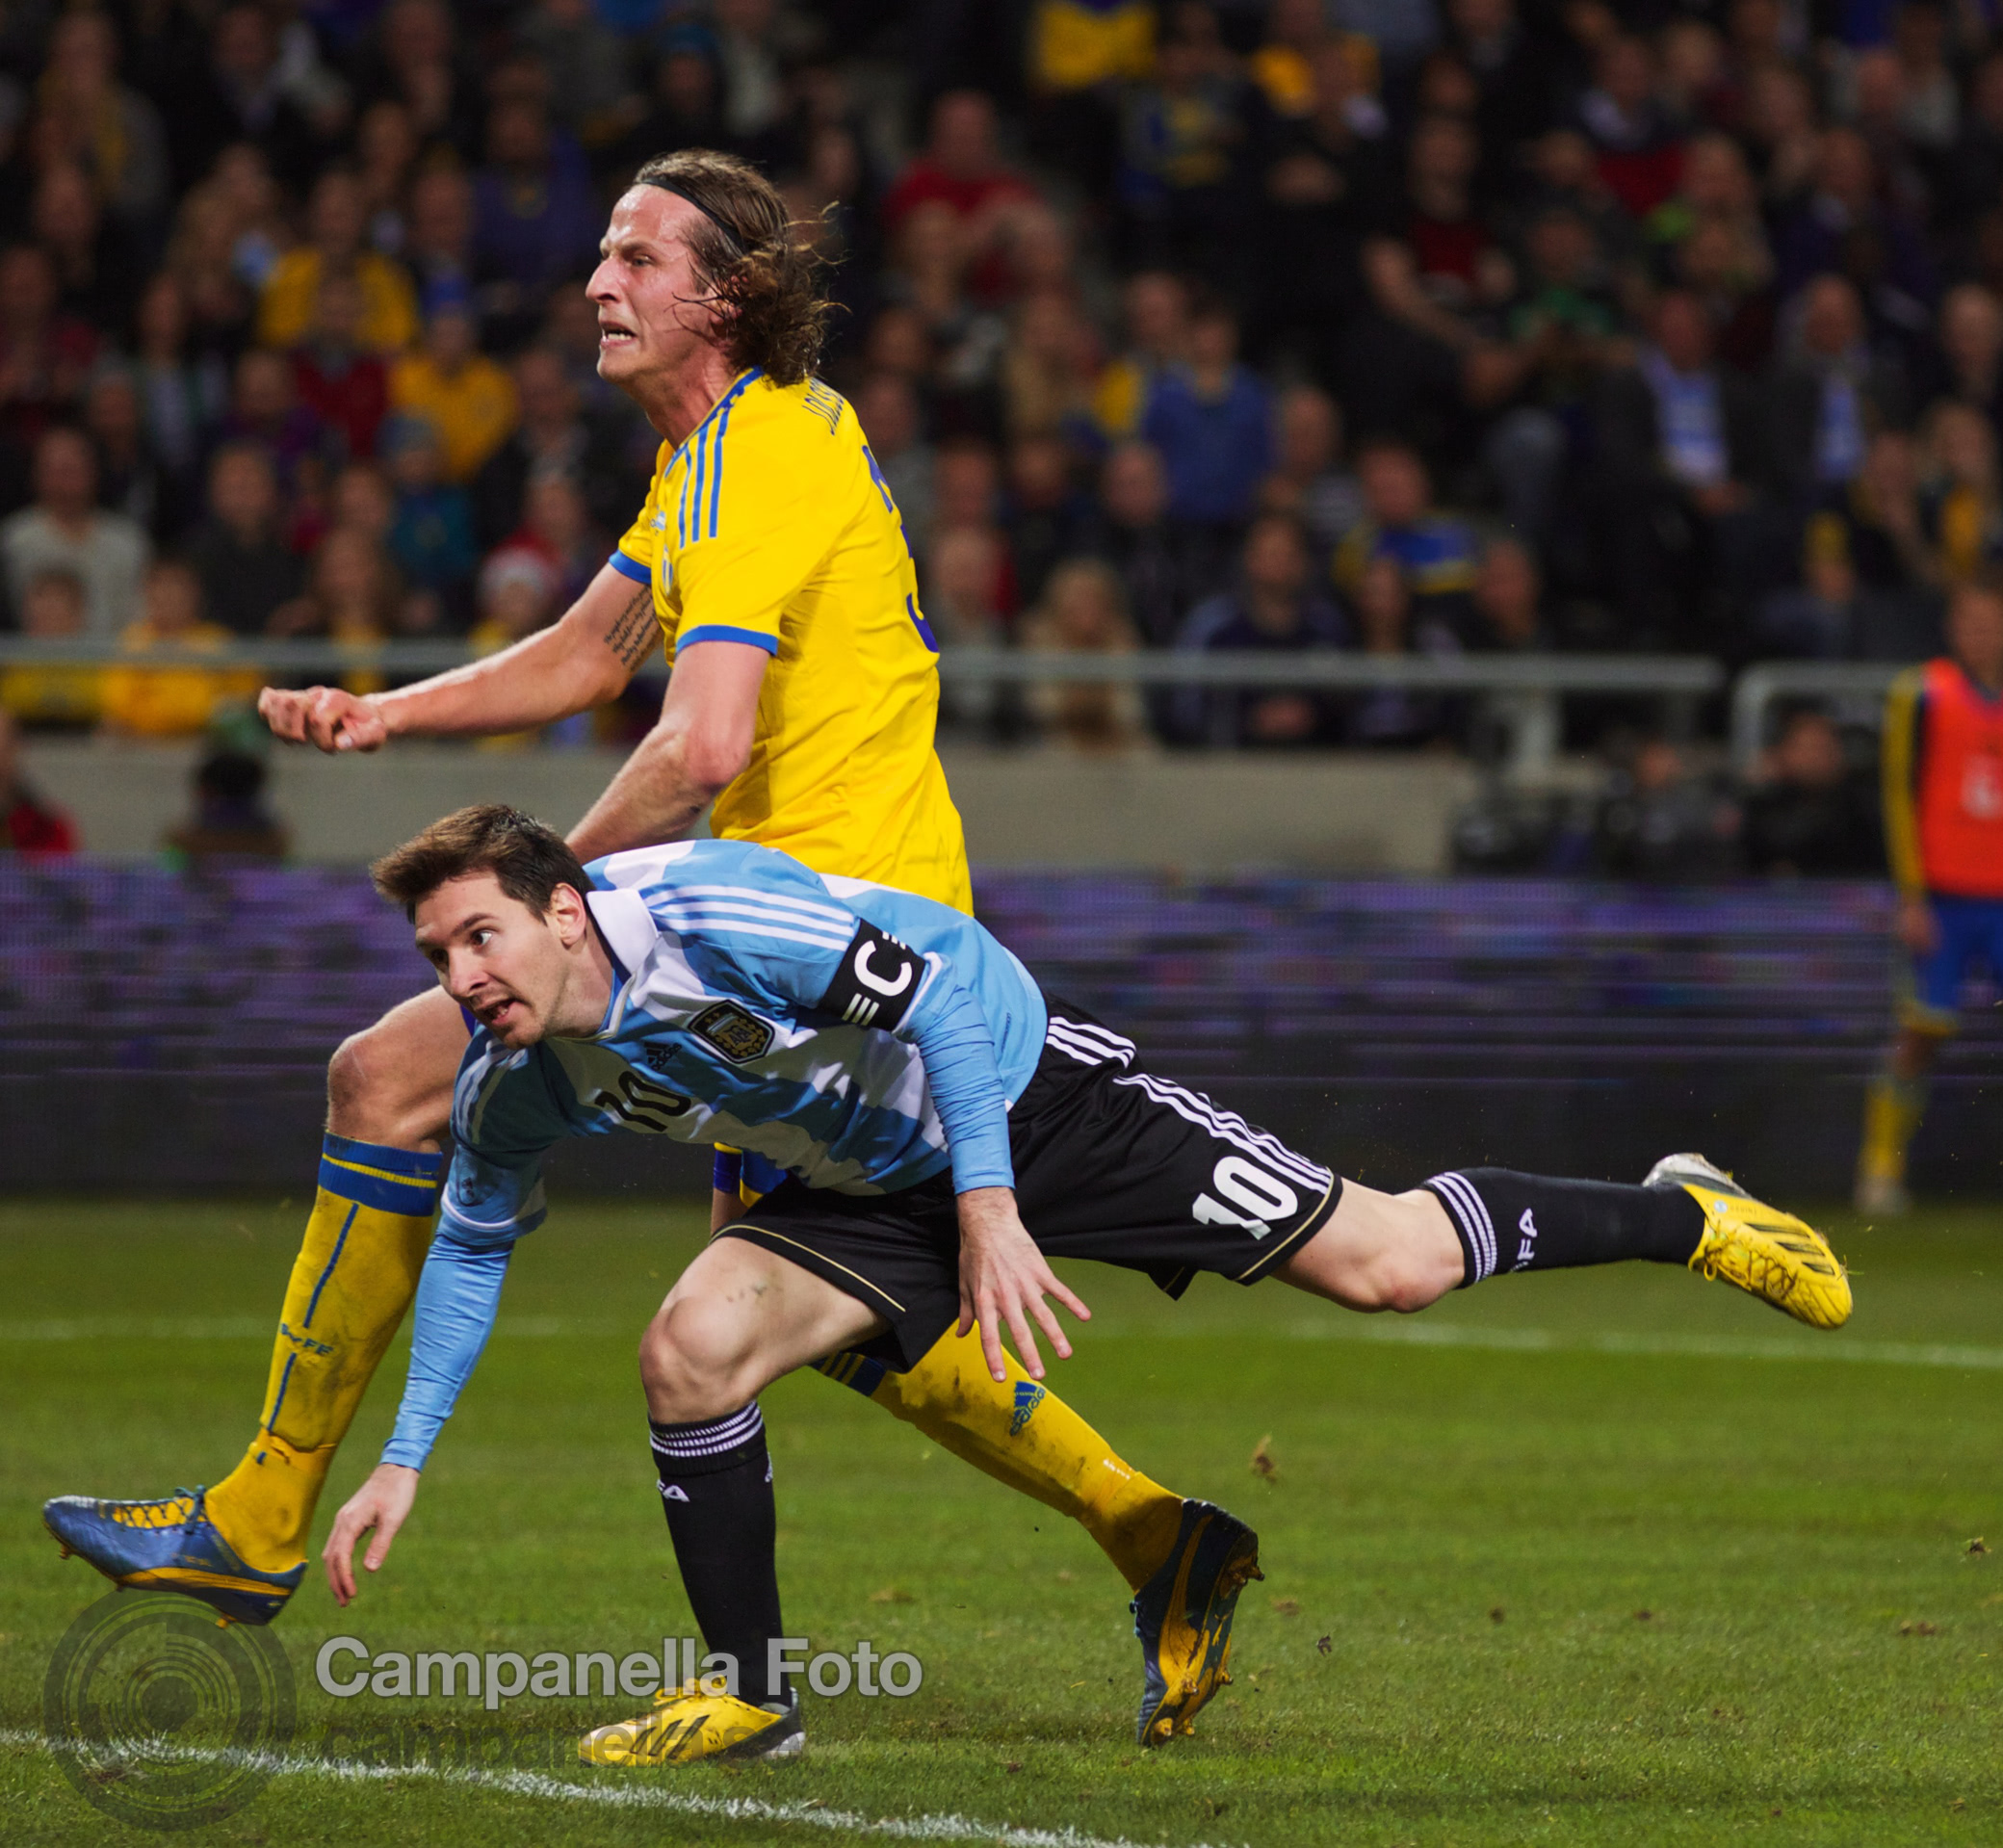 Sweden takes on Argentina - 26 of 35